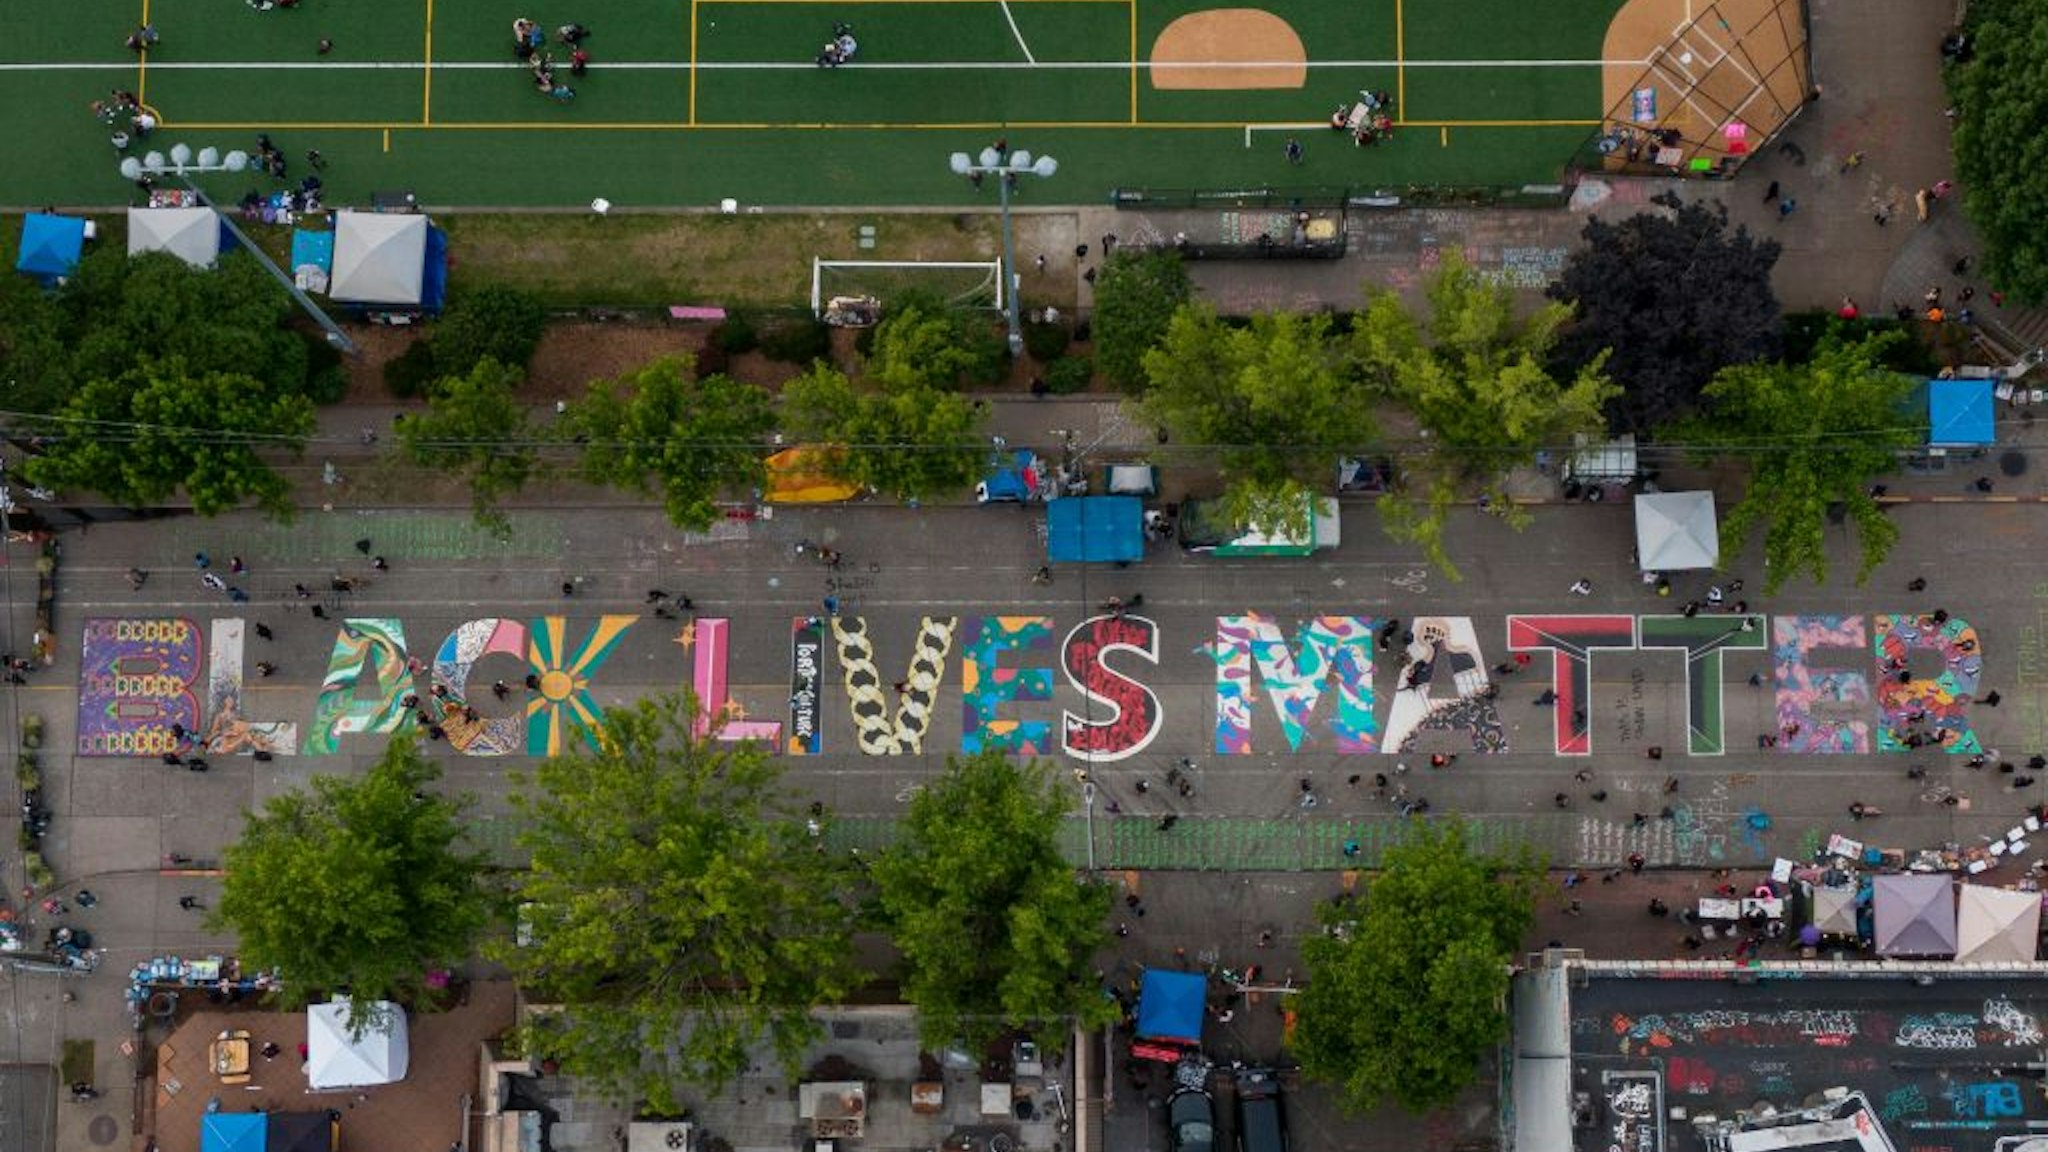 An aerial view of a Black Lives Matter mural on East Pine Street near Cal Anderson Park is seen during ongoing Black Lives Matter events in the so-called "CHOP," an area that protesters have called both the "Capitol Hill Occupied Protest" and the "Capitol Hill Organized Protest, on June 14, 2020 in Seattle, Washington.